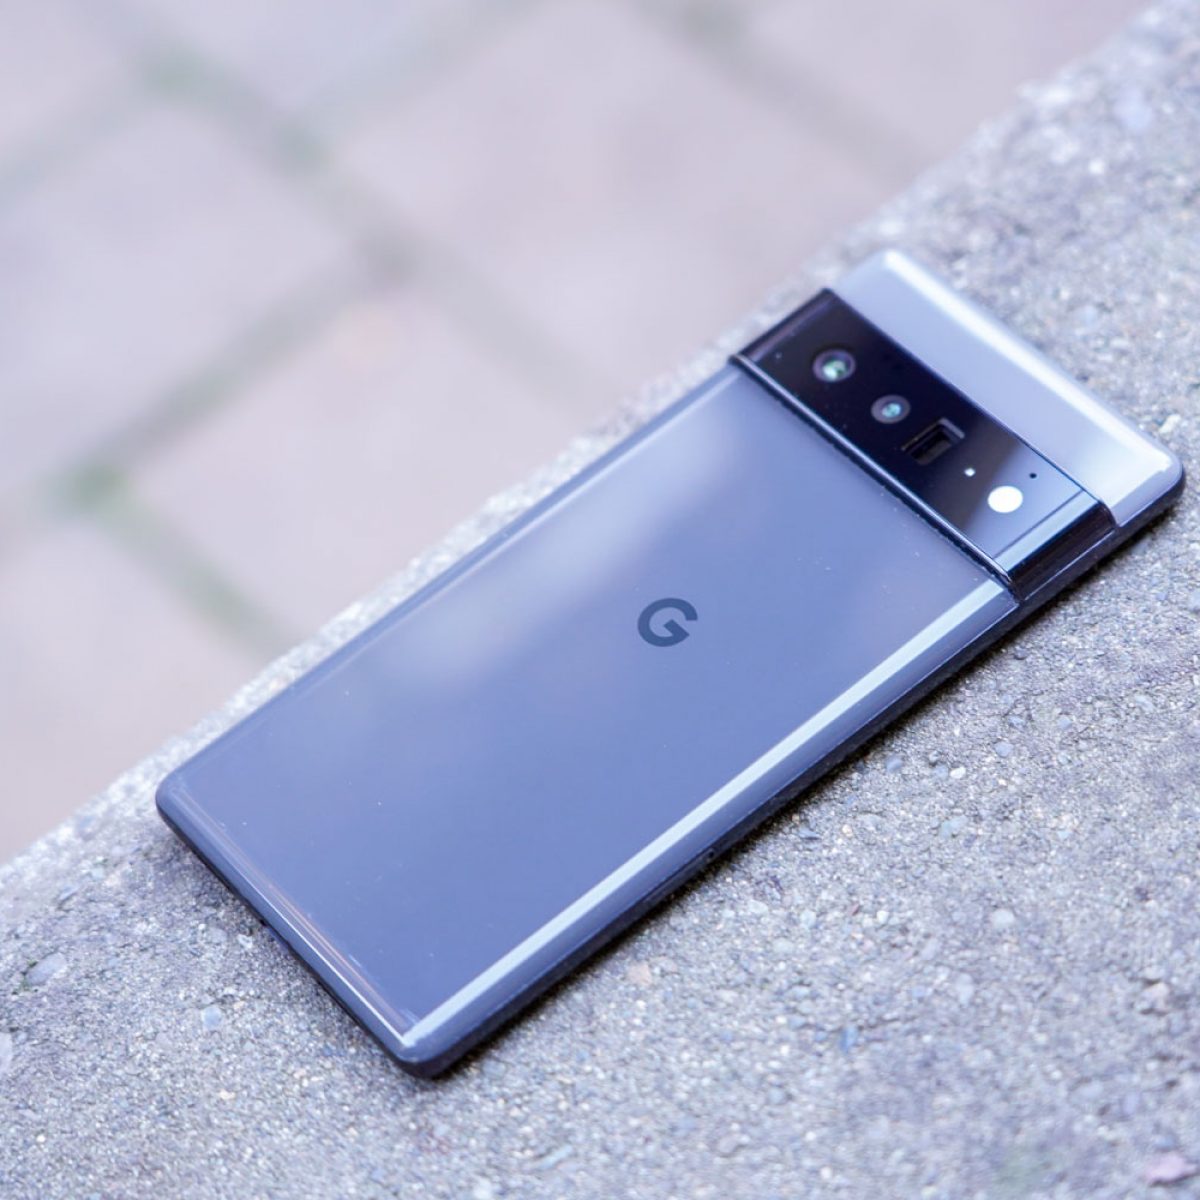 Google pushes computational photography into the future with its new Pixel 6,  Pixel 6 Pro smartphones: Digital Photography Review